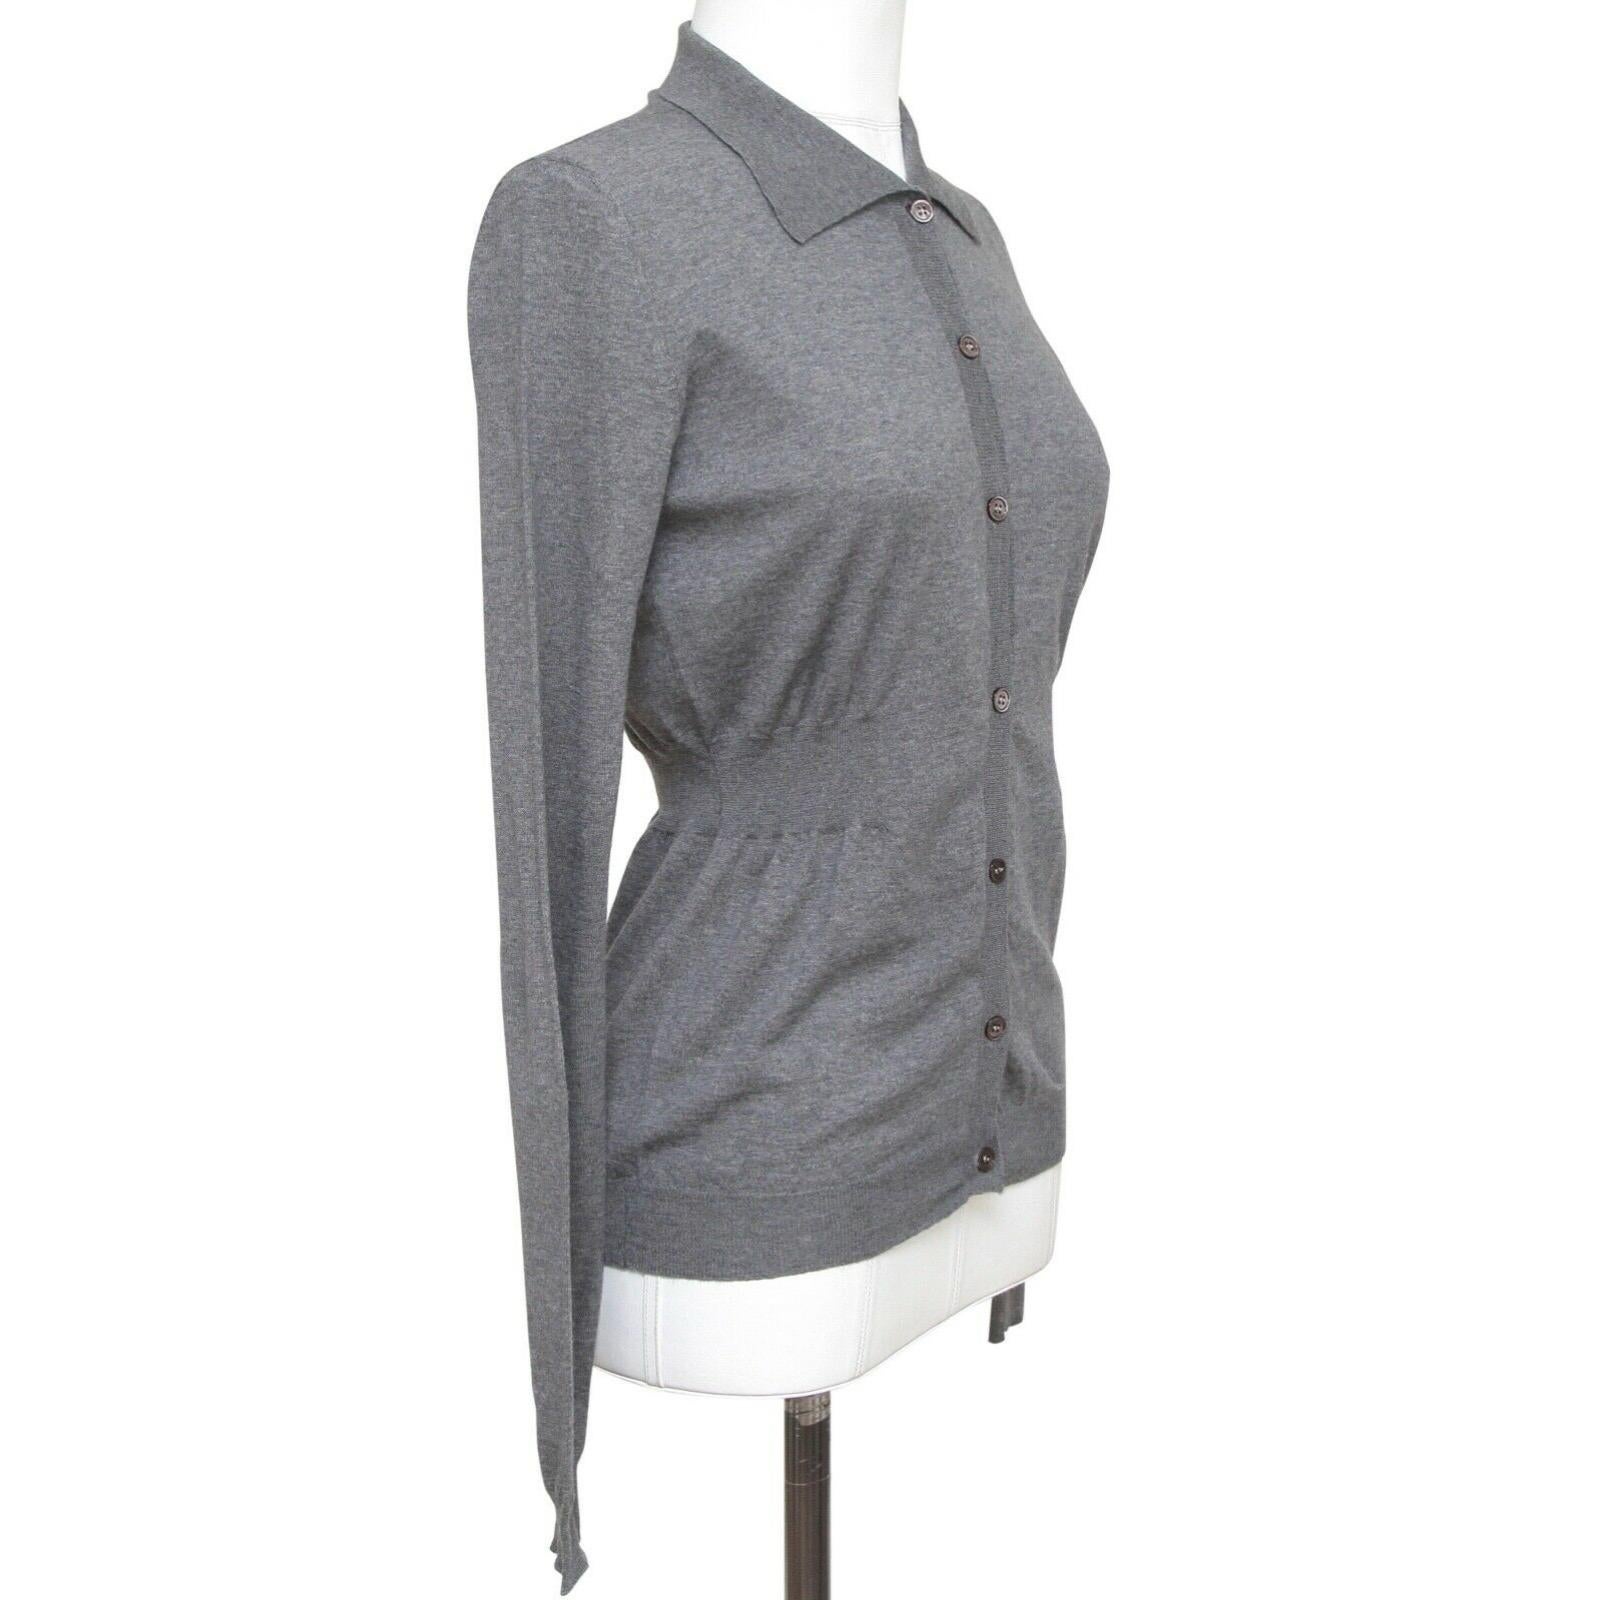 GUARANTEED AUTHENTIC LOVELY MARNI GREY WOOL LONG SLEEVE CARDIGAN


Details:
- Very unique inner sleeve open vents.
- Lightweight grey long sleeve cardigan, has a great easy fit.
- Collar, front button closure.
- Ribbing at collar, waist, hem and